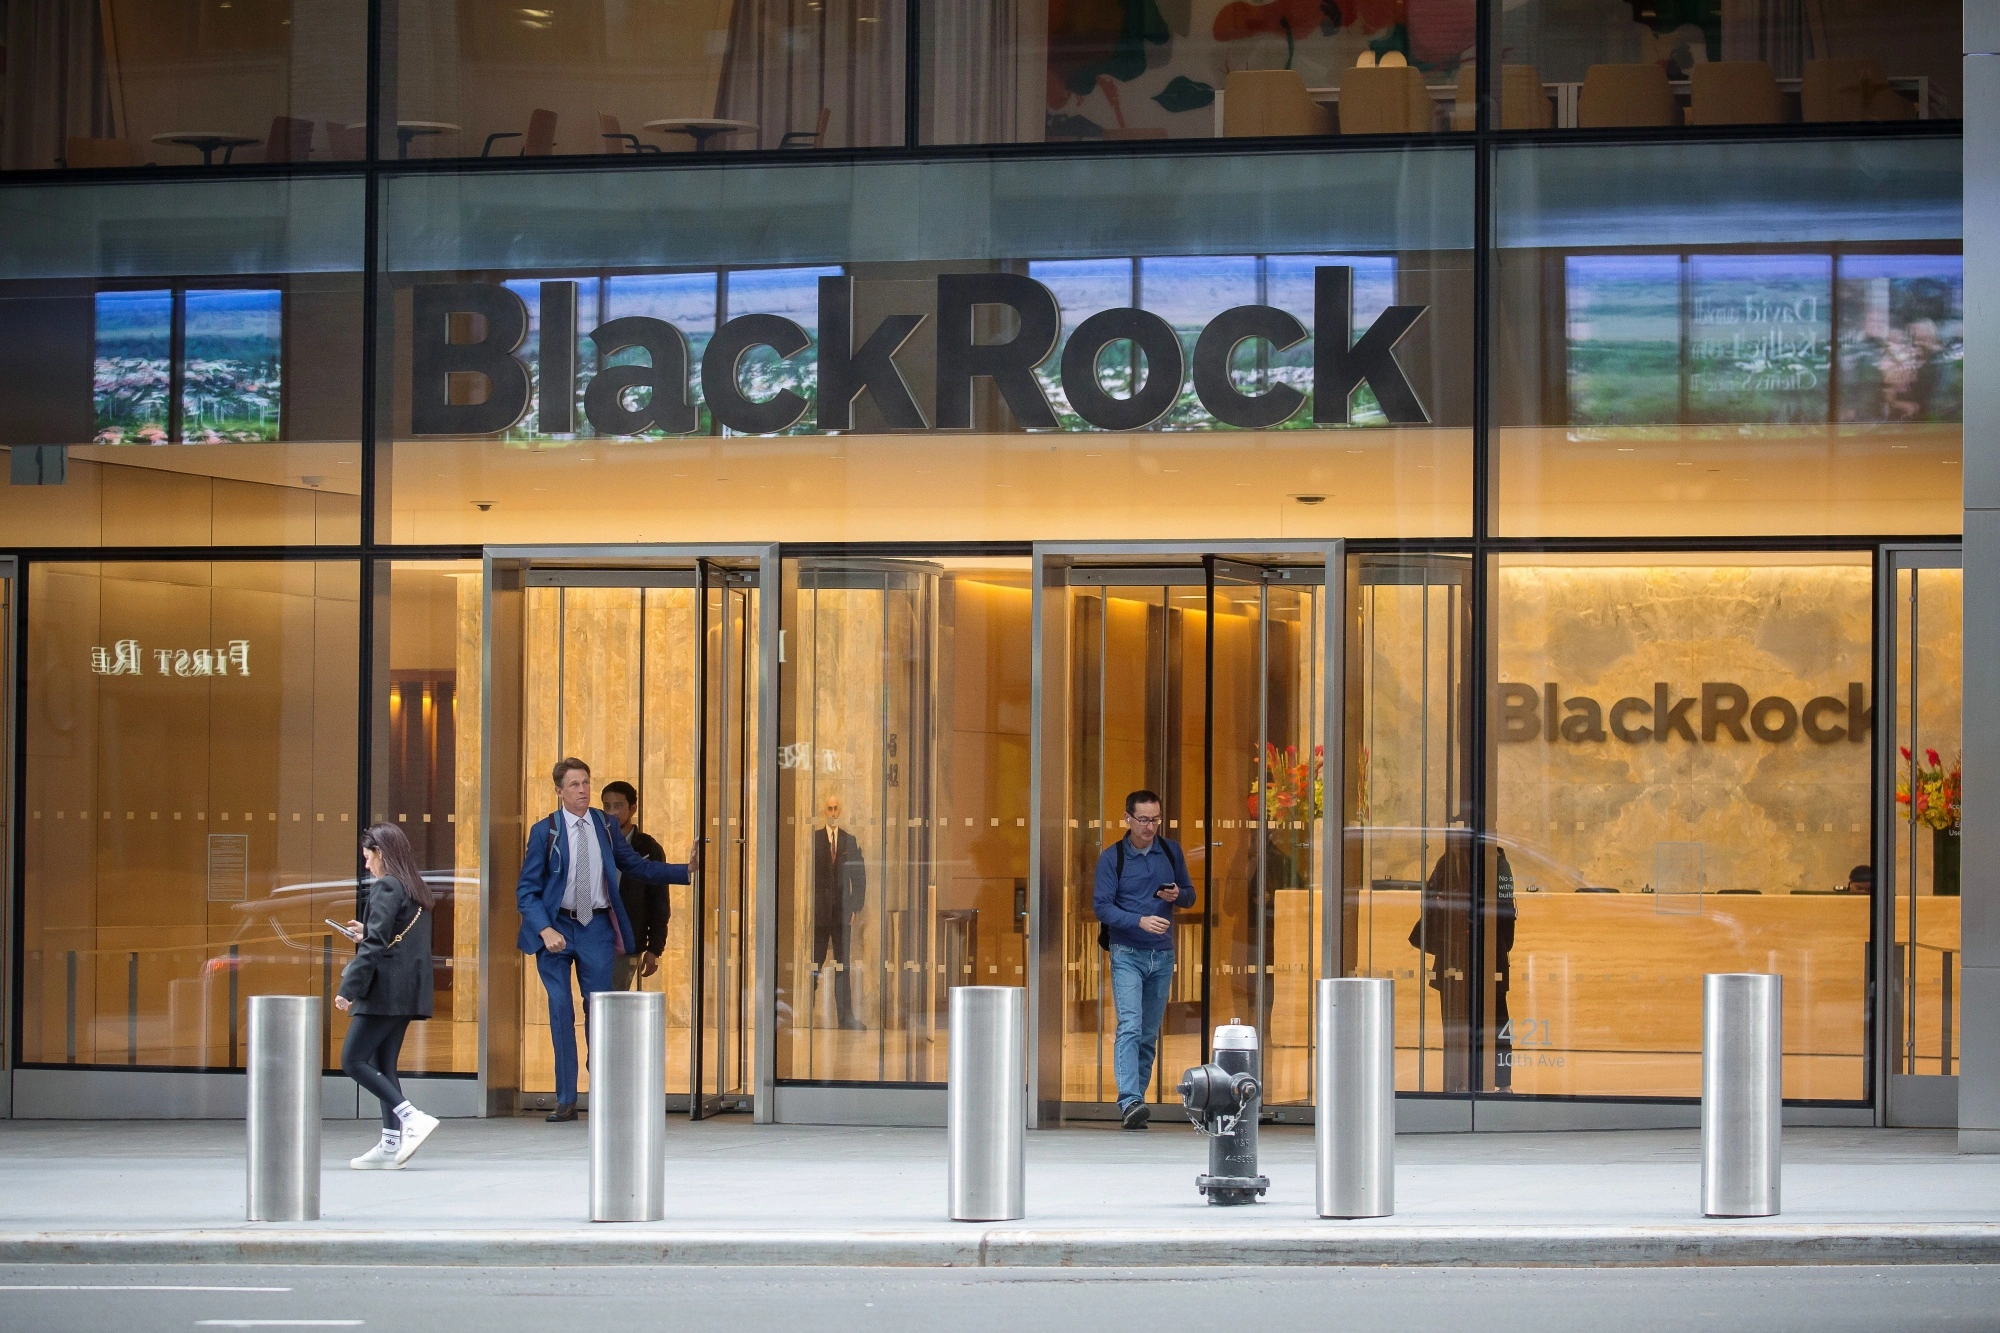 BlackRock logo: A bold, minimalist design symbolizing strength and stability in the financial industry.